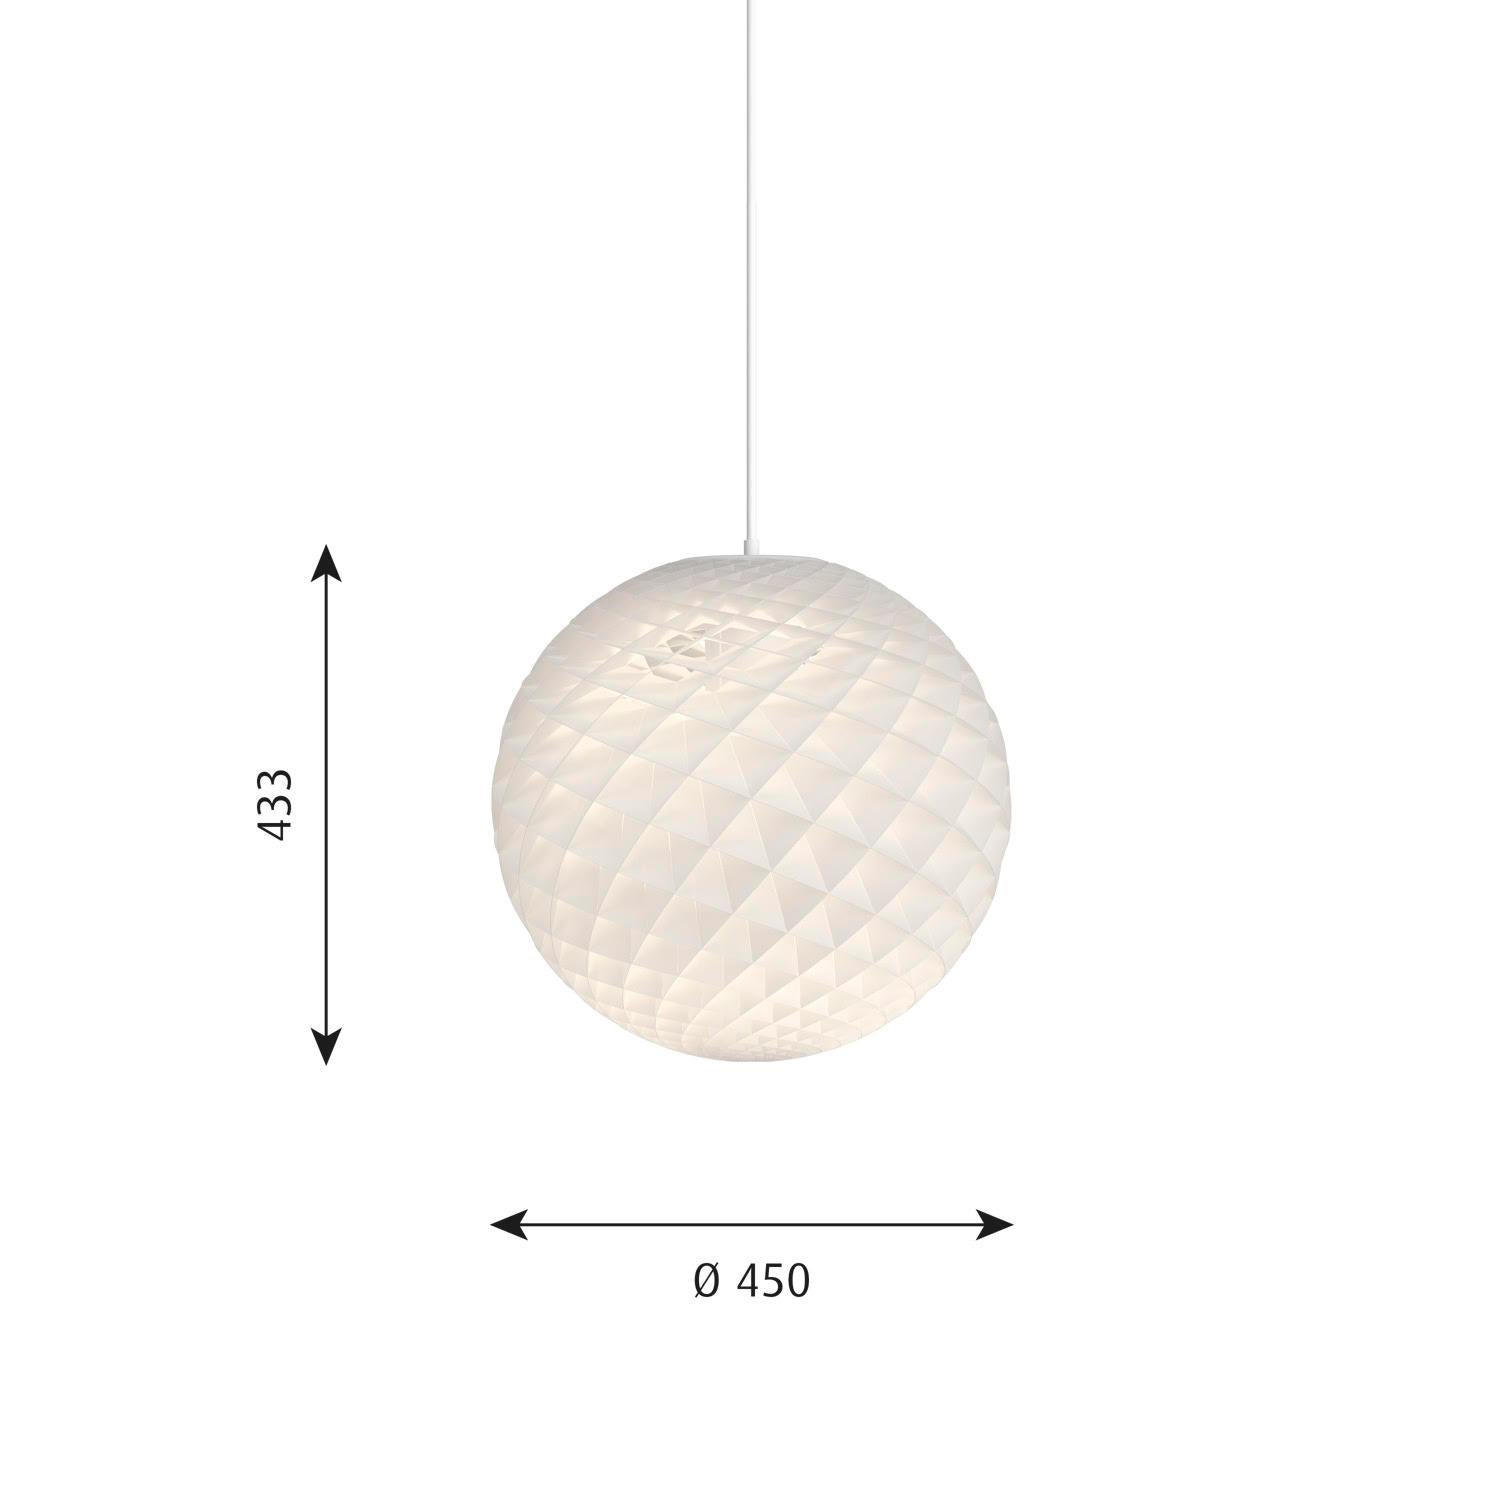 Louis Poulsen D450 Patere Round Chandelier
Patere Round Chandelier D450 by Louis Poulsen
Patera is composed of a series of alveoli whose angles are carefully calculated to produce this incredible interaction between light and shadow. The shape of